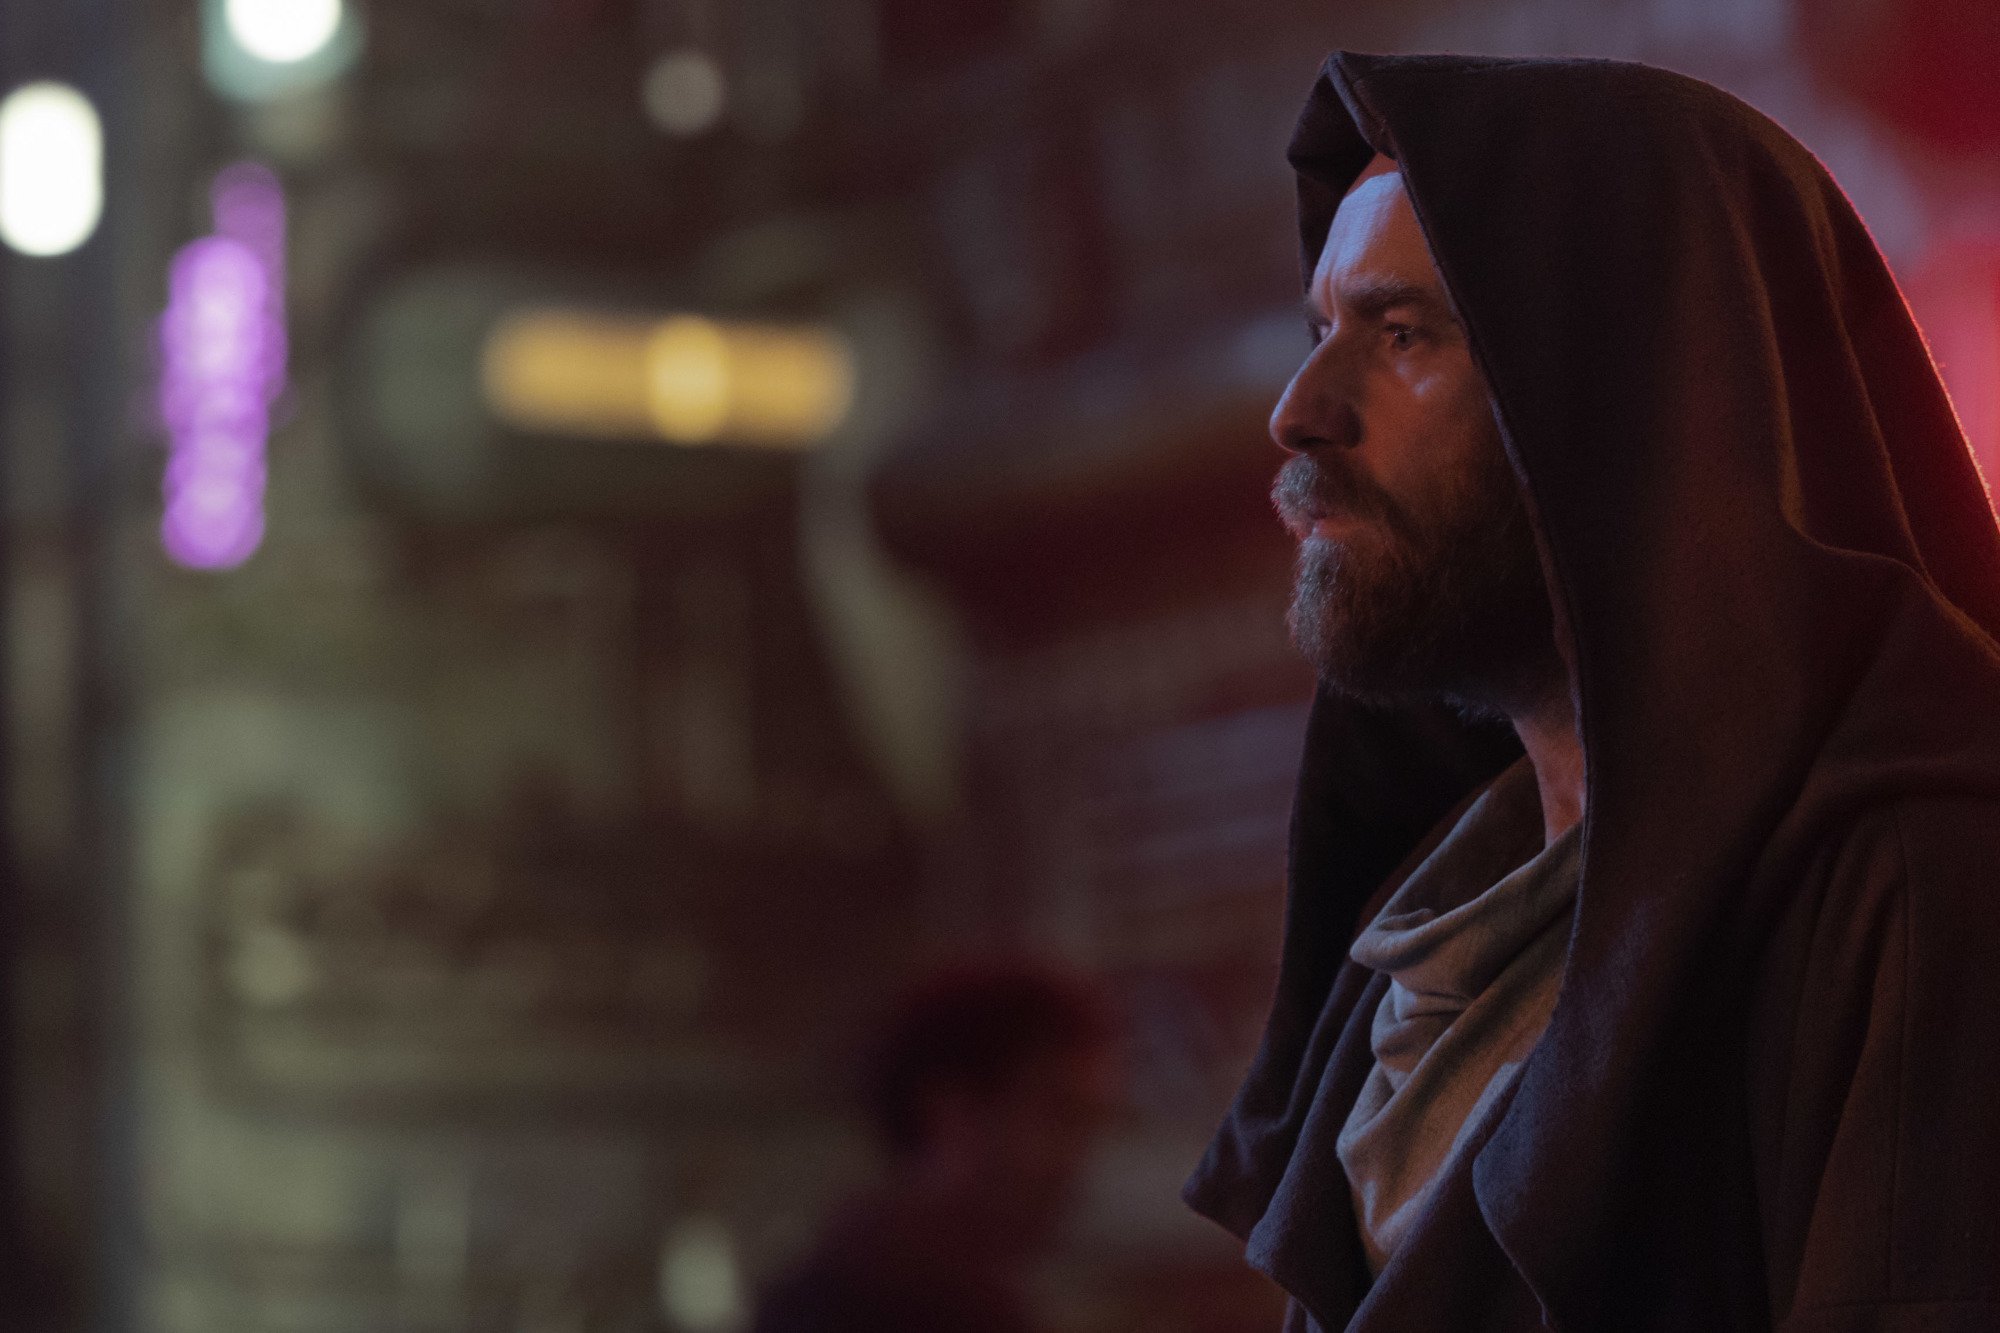 Ewan McGregor as Obi-Wan in 'Obi-Wan Kenobi,' which has an episode 3 release date of May 3. He's wearing a hood and staring out at something off-screen.